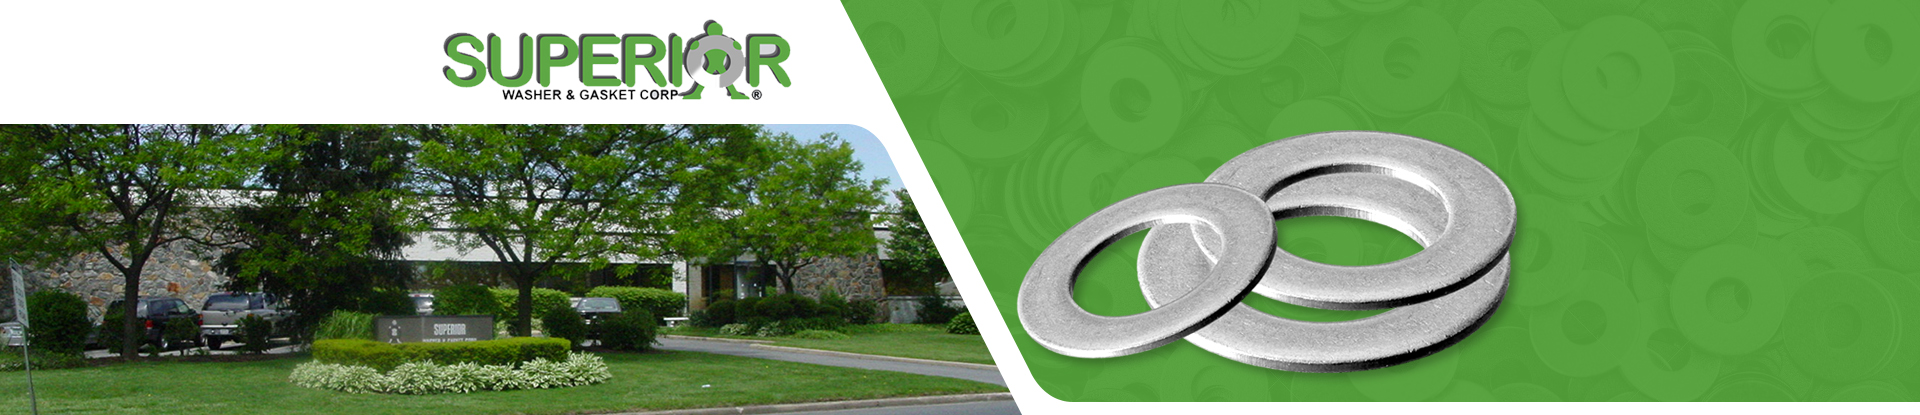 Superior Washer & Gasket Corp